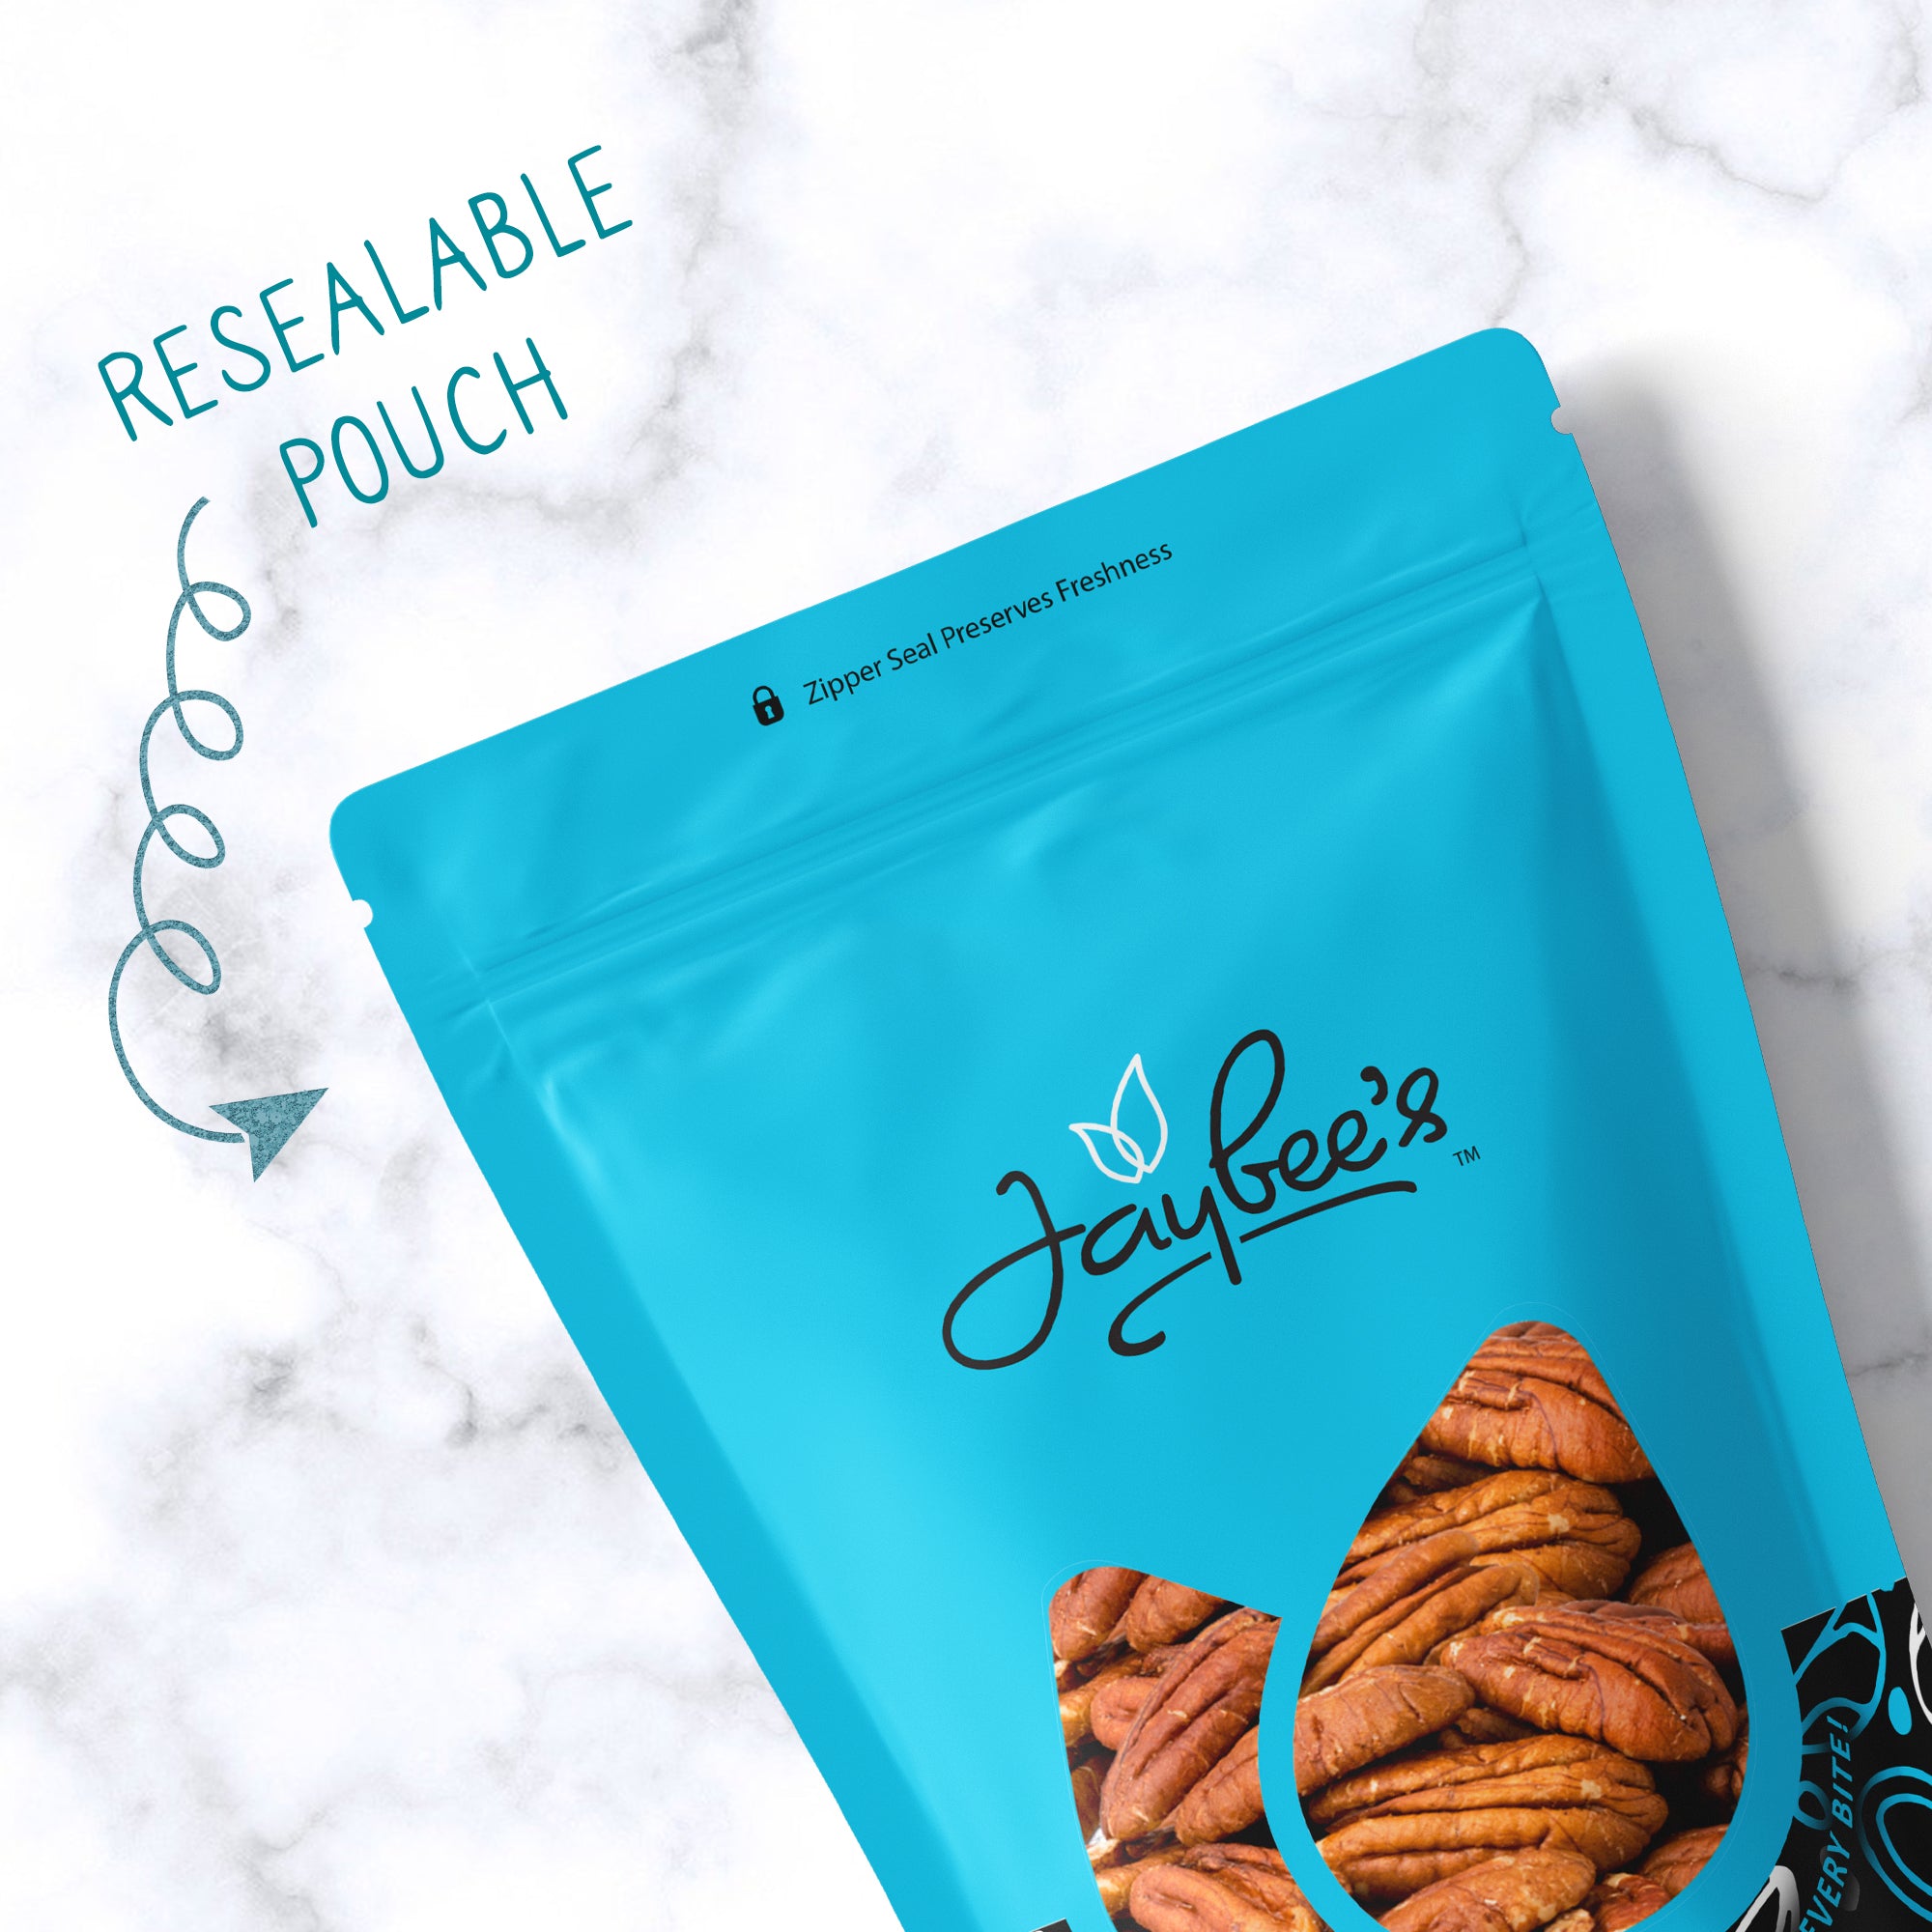 Pecans - Roasted & Salted